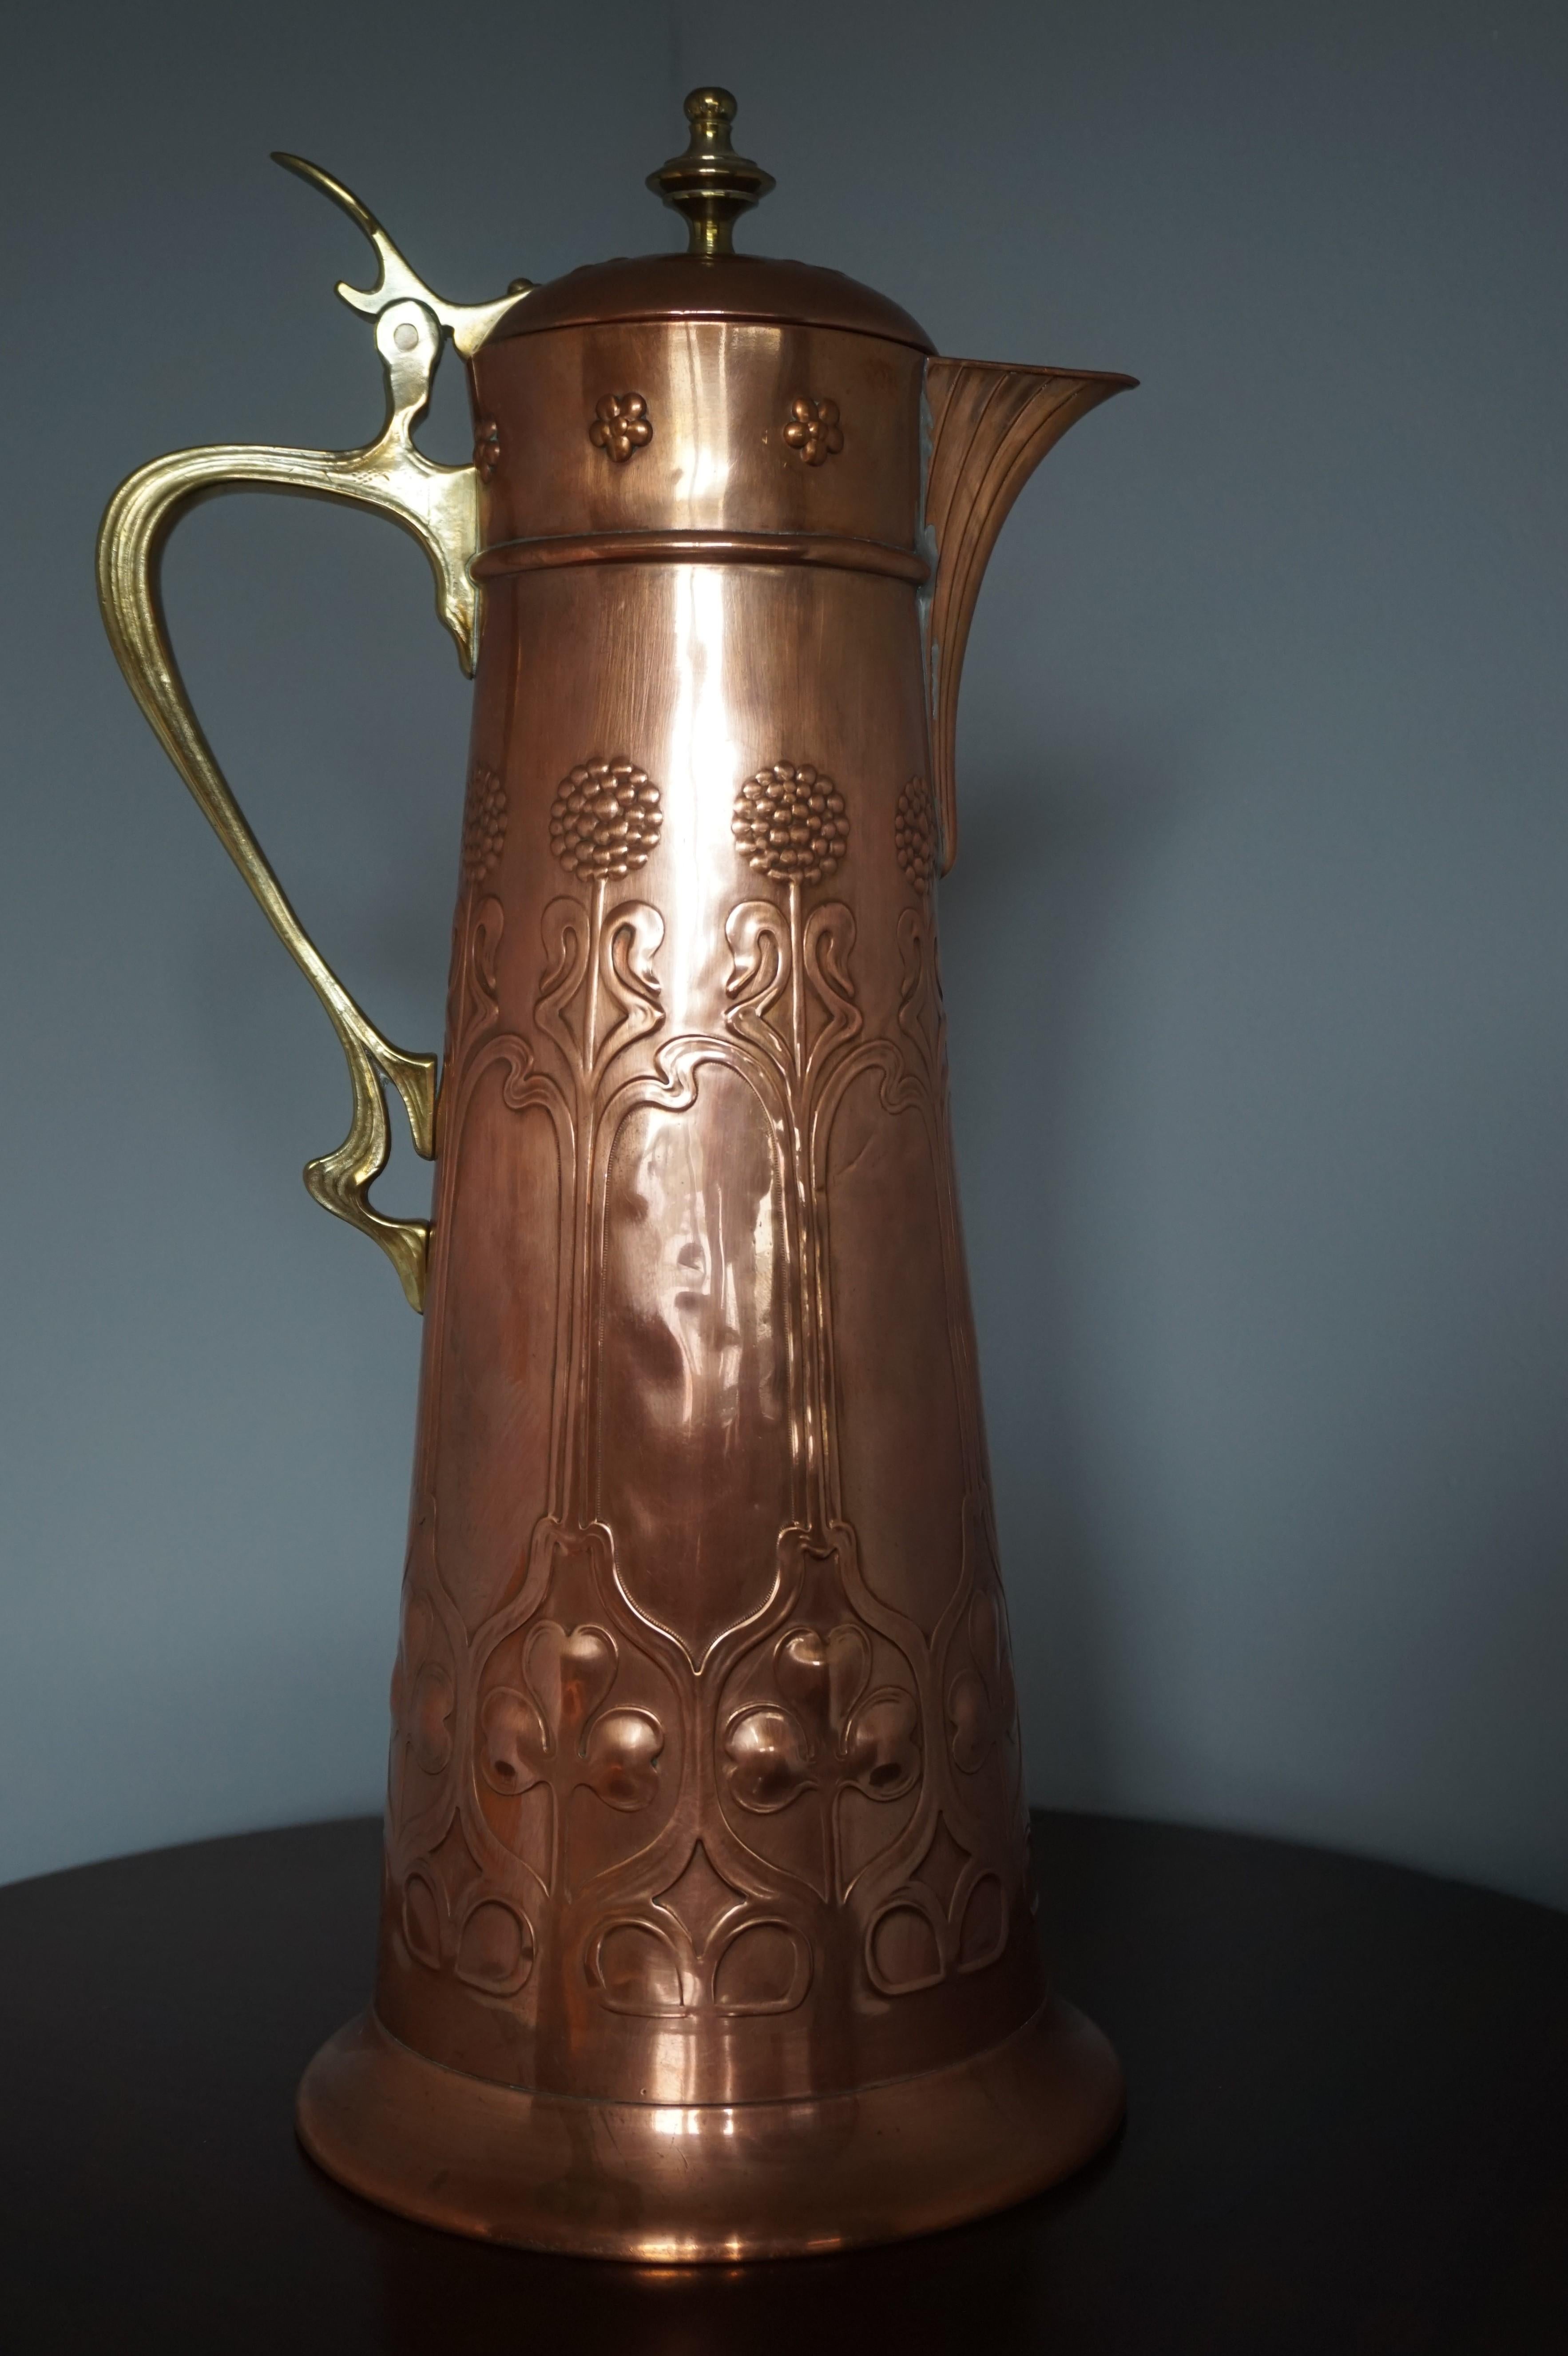 Wonderfully handcrafted WMF copper jug with brass handles.

This good size and wonderful shape Arts & Crafts jug was all-handcrafted (and marked) by the famous German makers WMF. Both the overal design and the warm patina of this pouring jug make